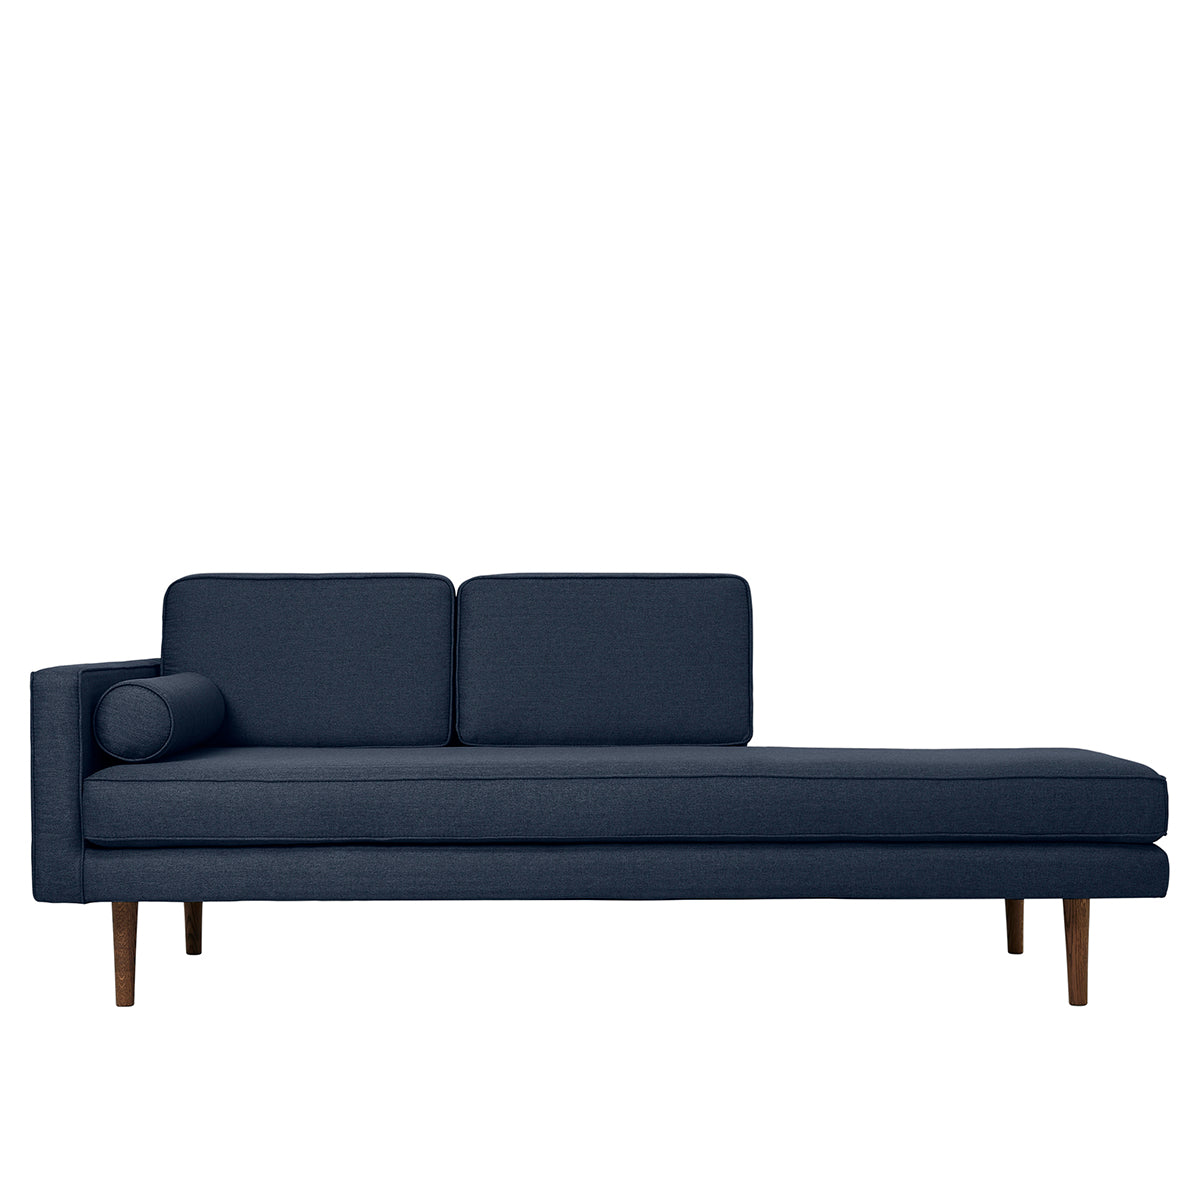 Chaise longue 'Wind' Tweed Navy